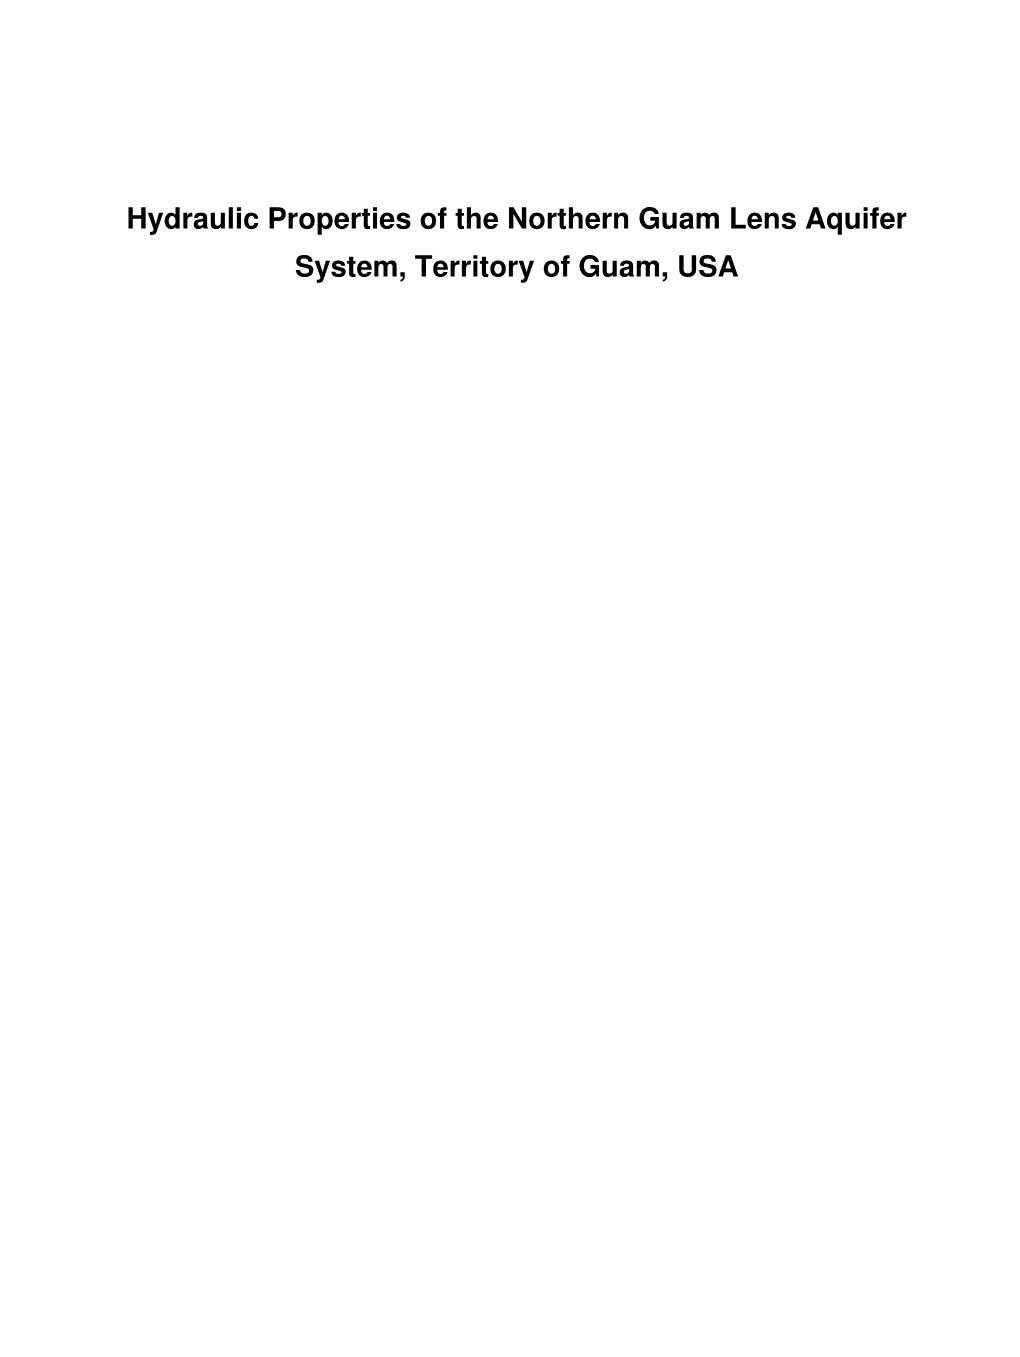 Hydraulic Properties of the Northern Guam Lens Aquifer System, Territory of Guam, USA Problem and Research Objectives